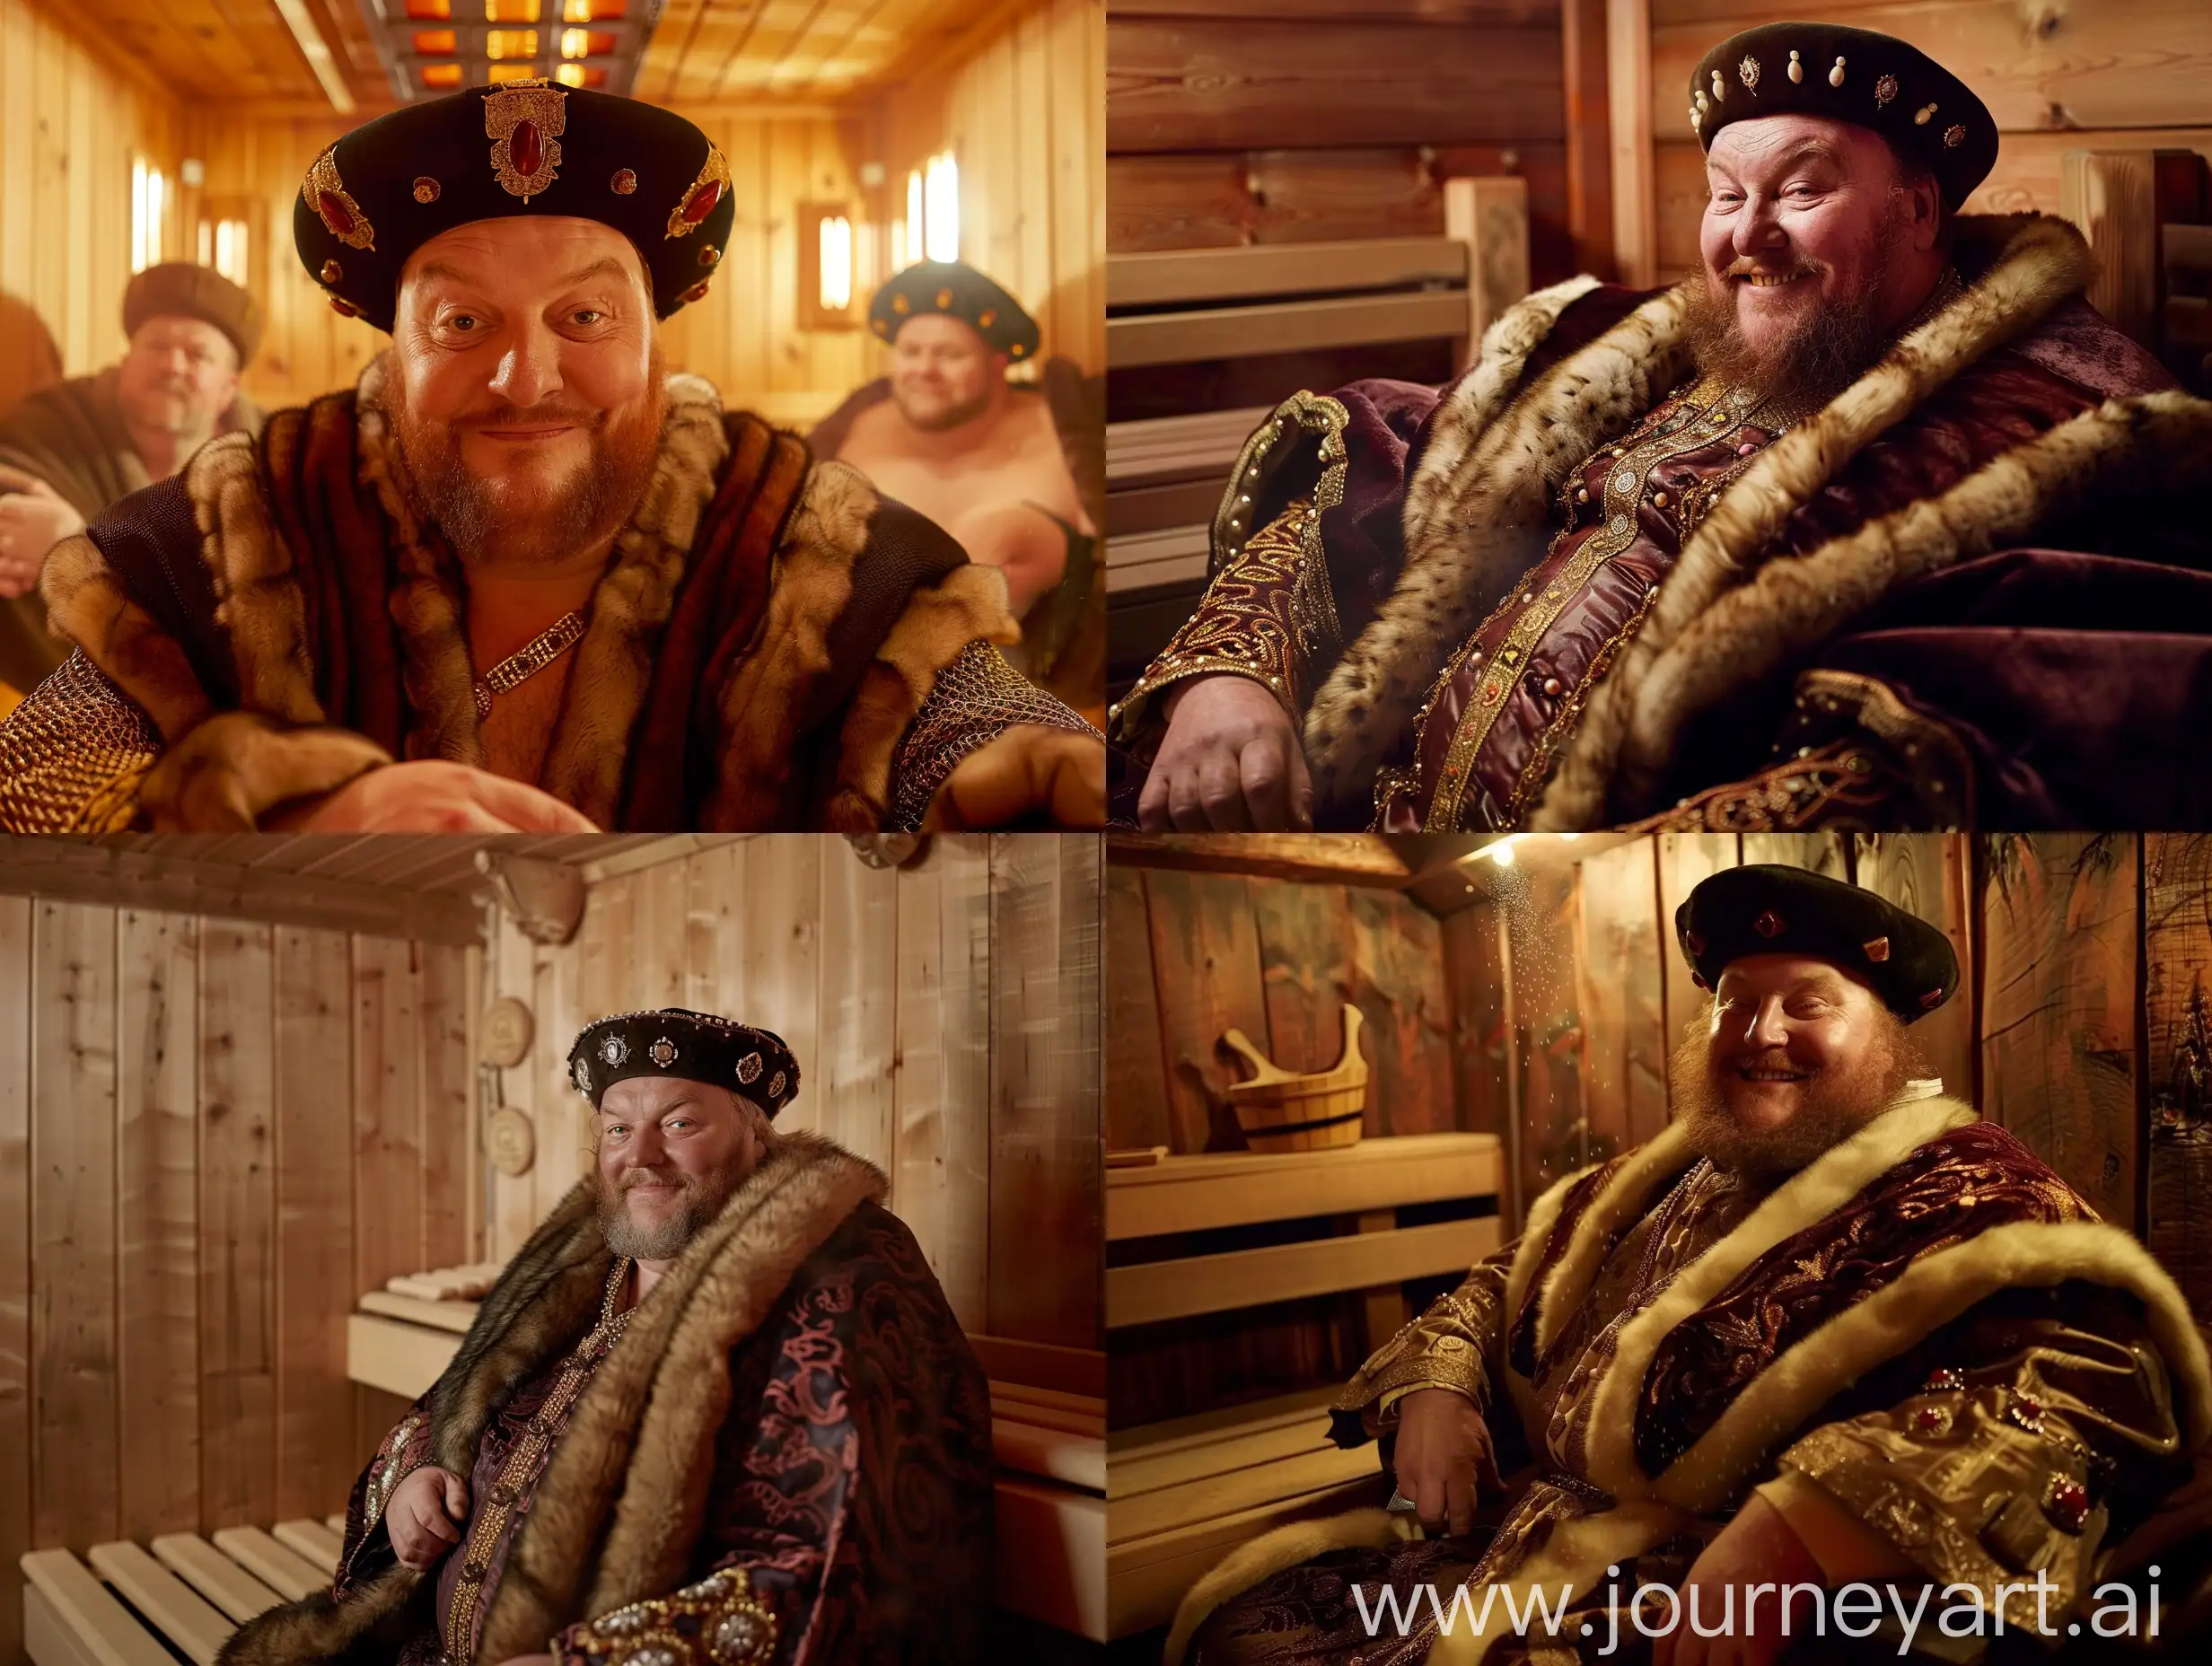 King Henry VIII grinning in a sauna